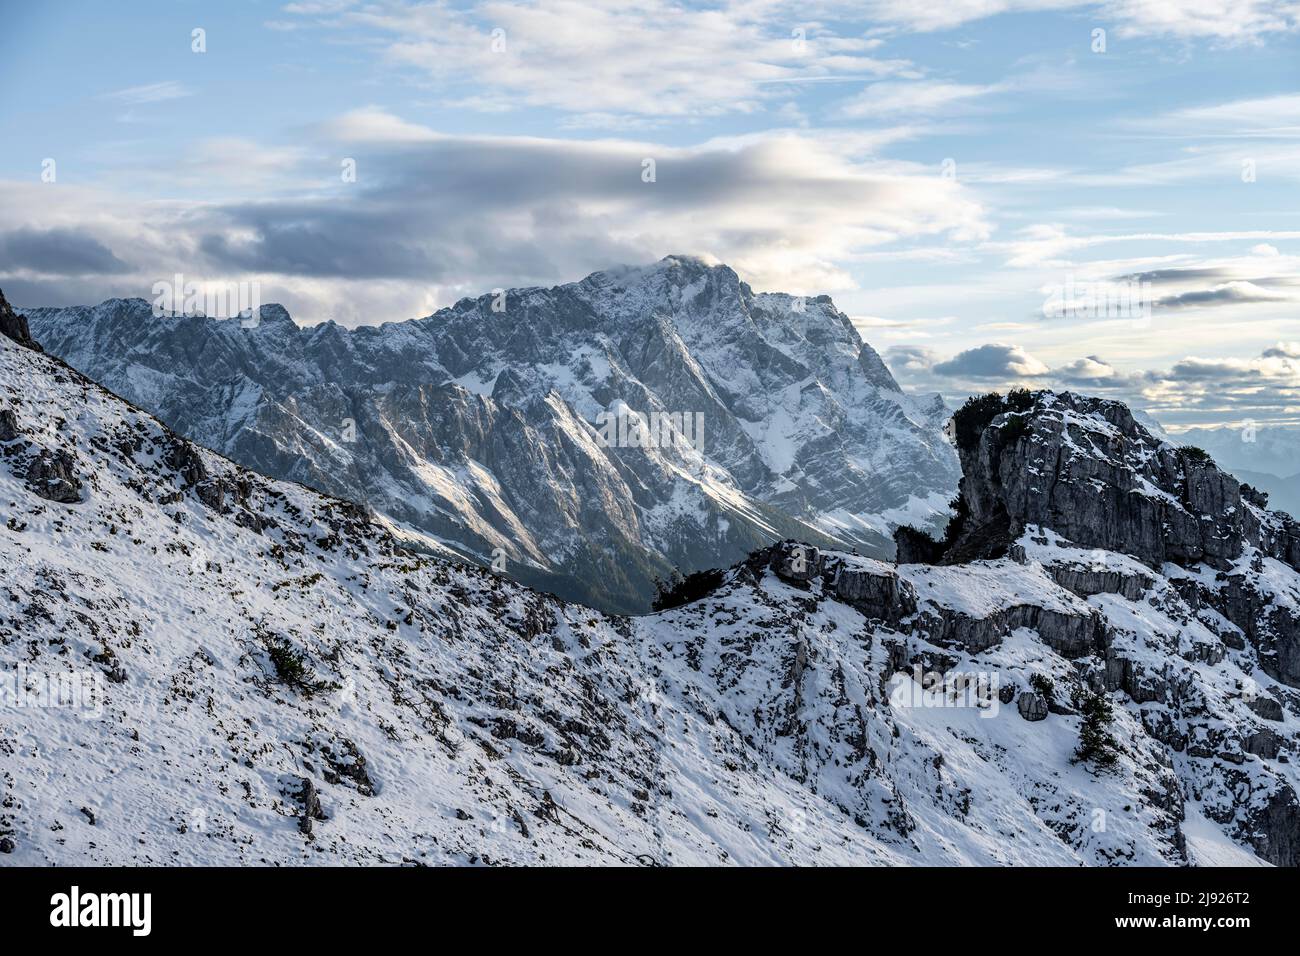 Zugspitze, mountains with snow, mountain landscape, Wetterstein mountains, evening mood, Bavaria, Germany Stock Photo